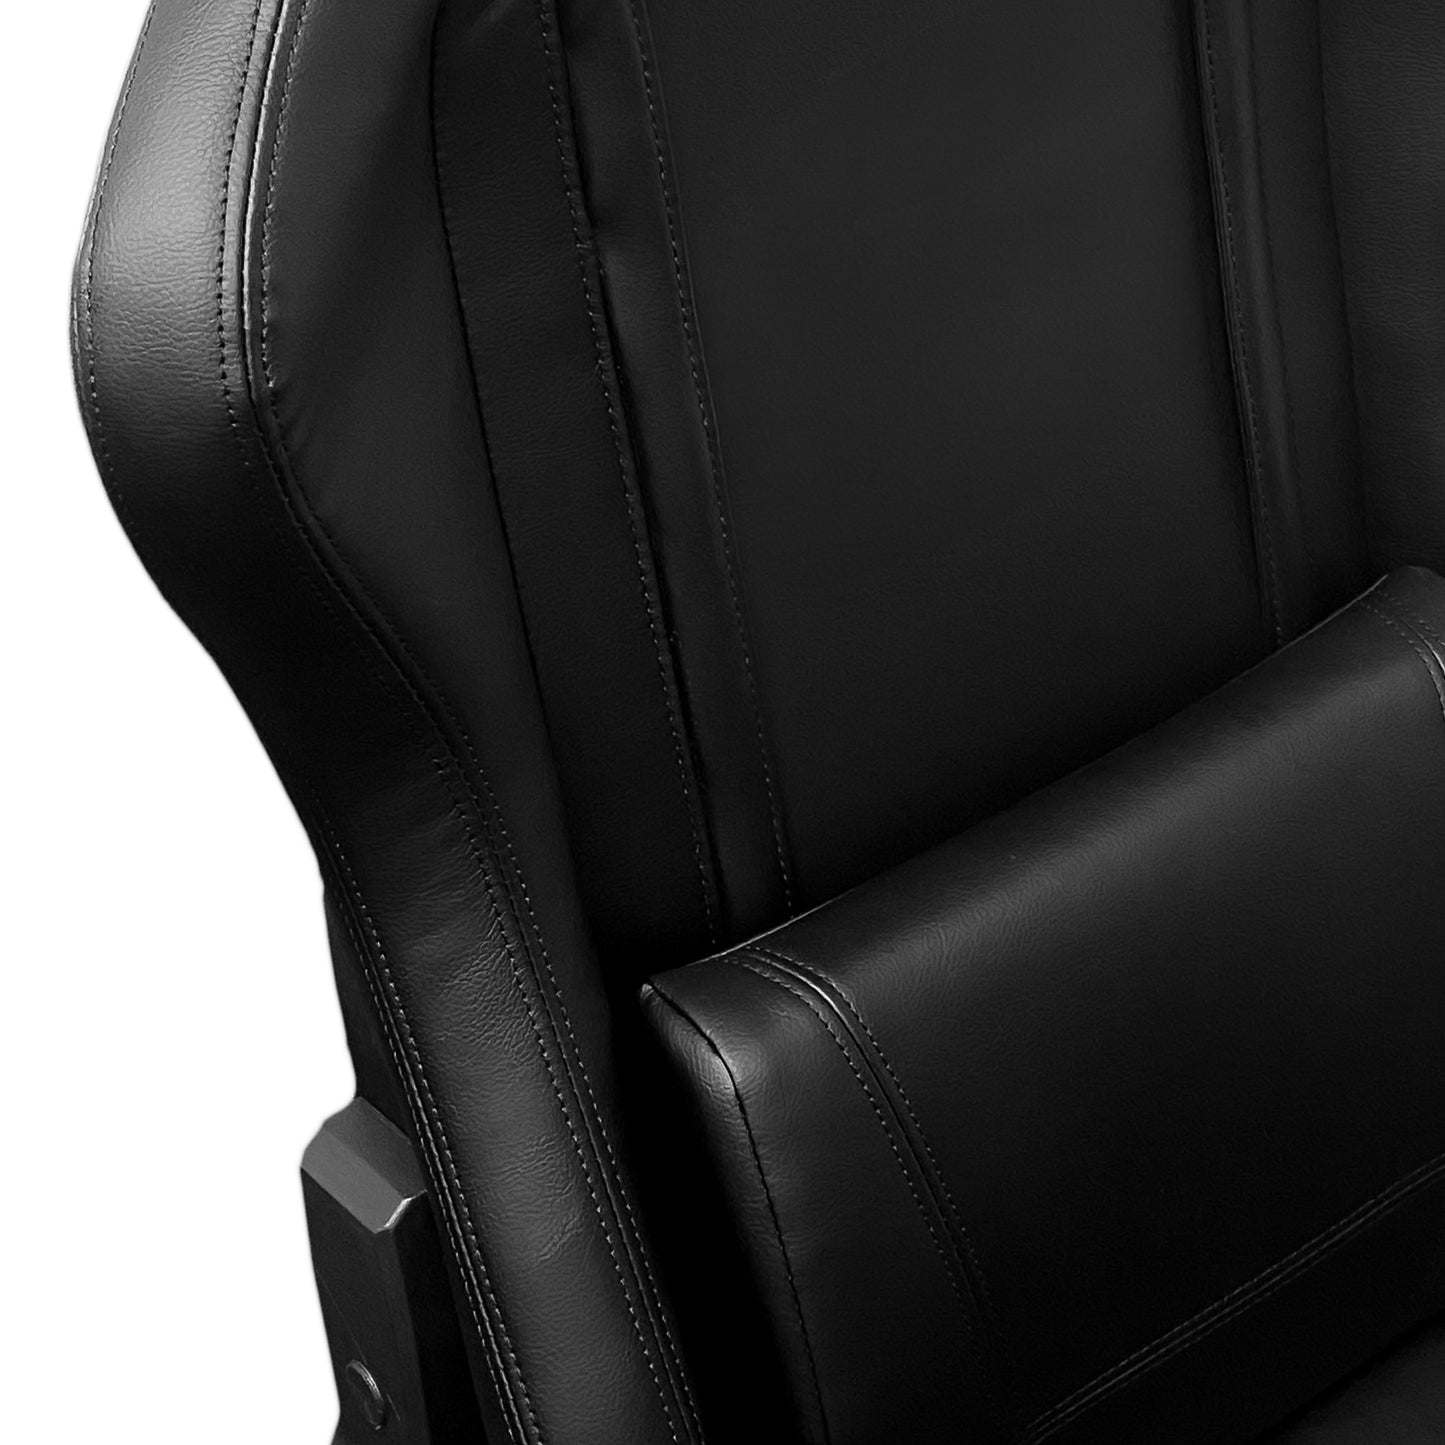 Xpression Pro Gaming Chair with Knicks Gaming Global Logo